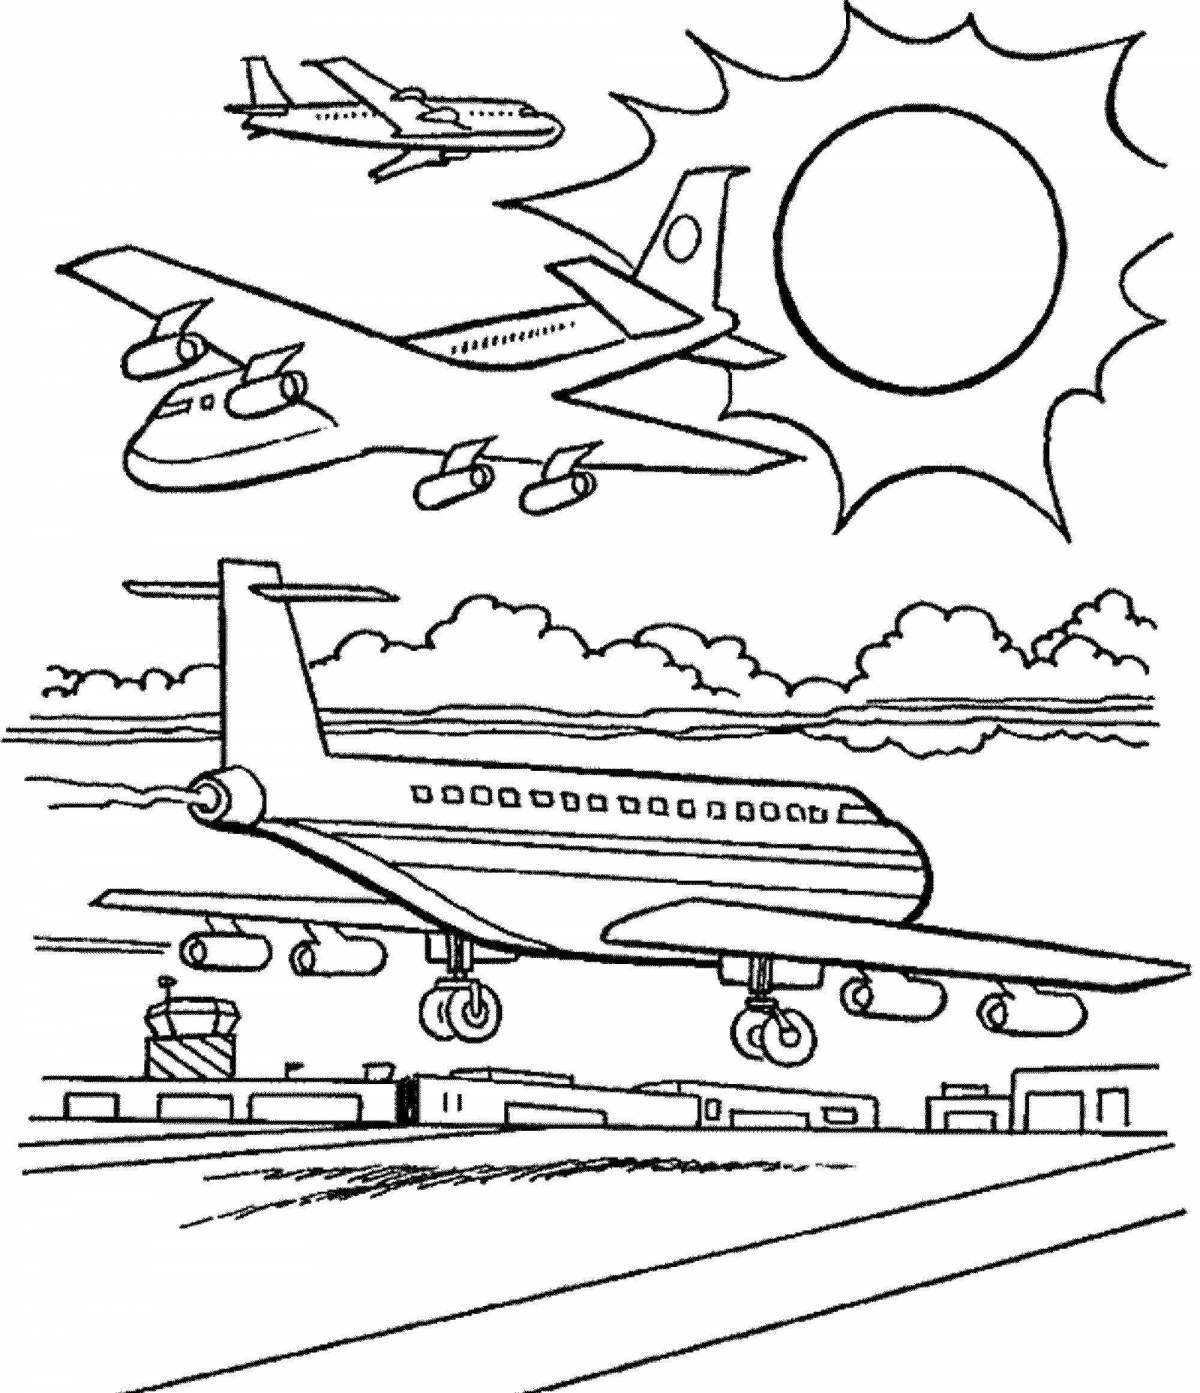 Colorful civil aviation coloring page